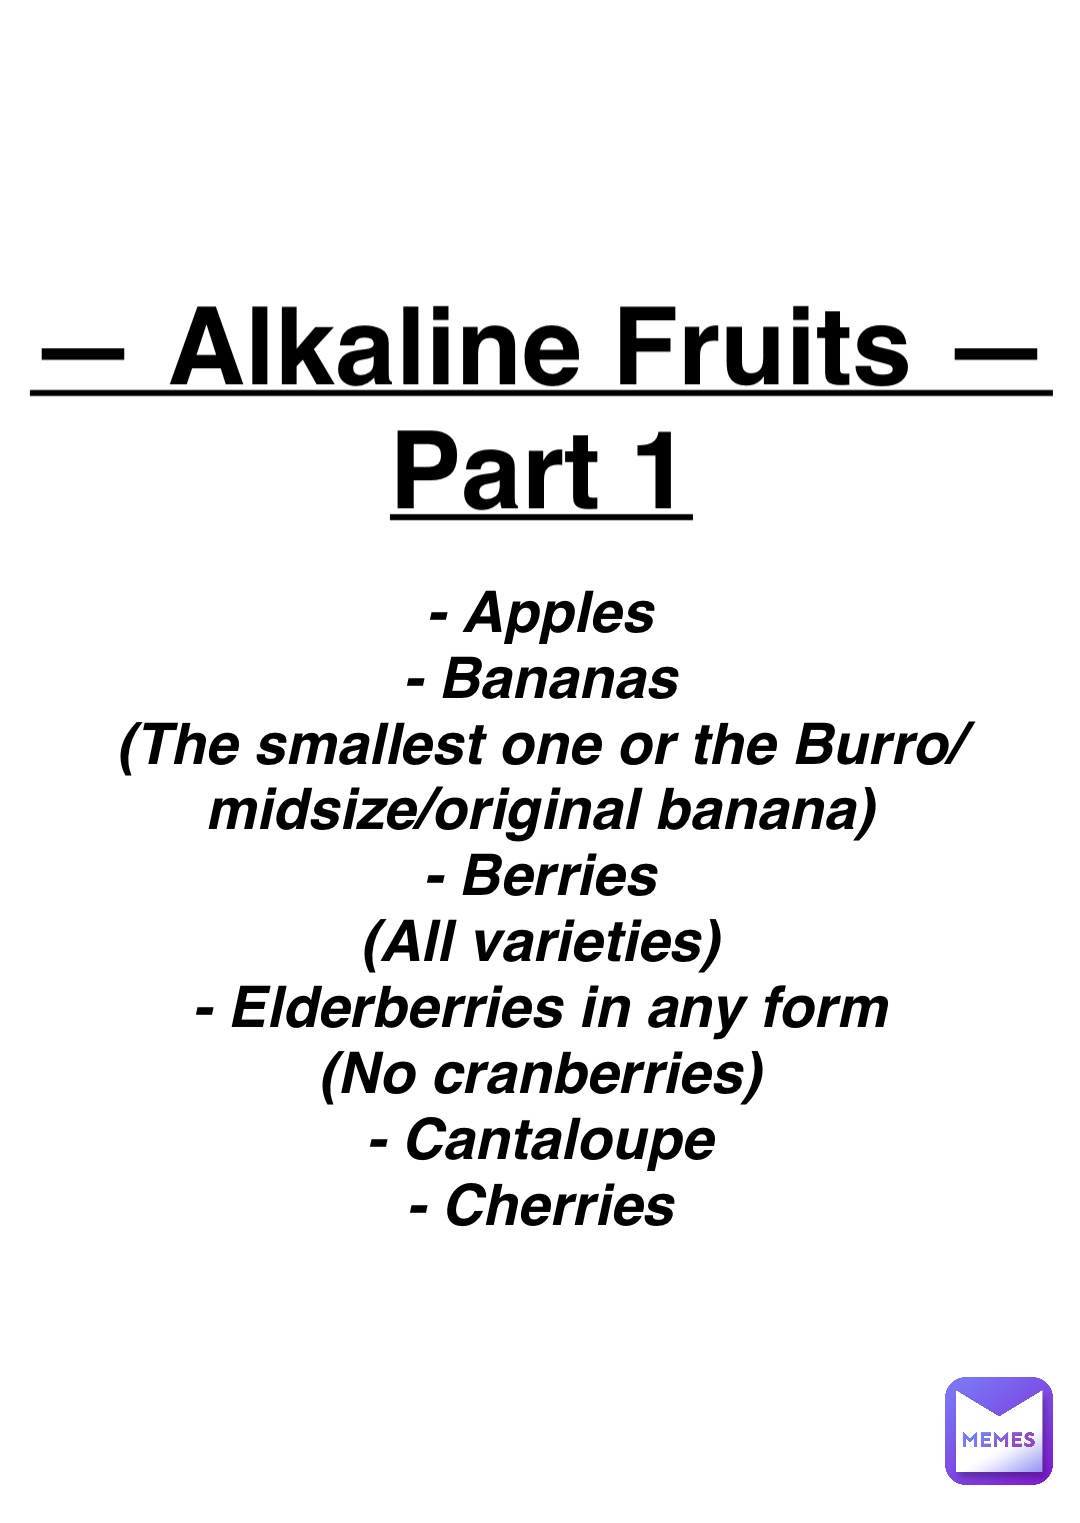 Double tap to edit — Alkaline Fruits —
Part 1 - Apples
- Bananas
(The smallest one or the Burro/midsize/original banana)
- Berries
(All varieties)
- Elderberries in any form
(No cranberries)
- Cantaloupe
- Cherries